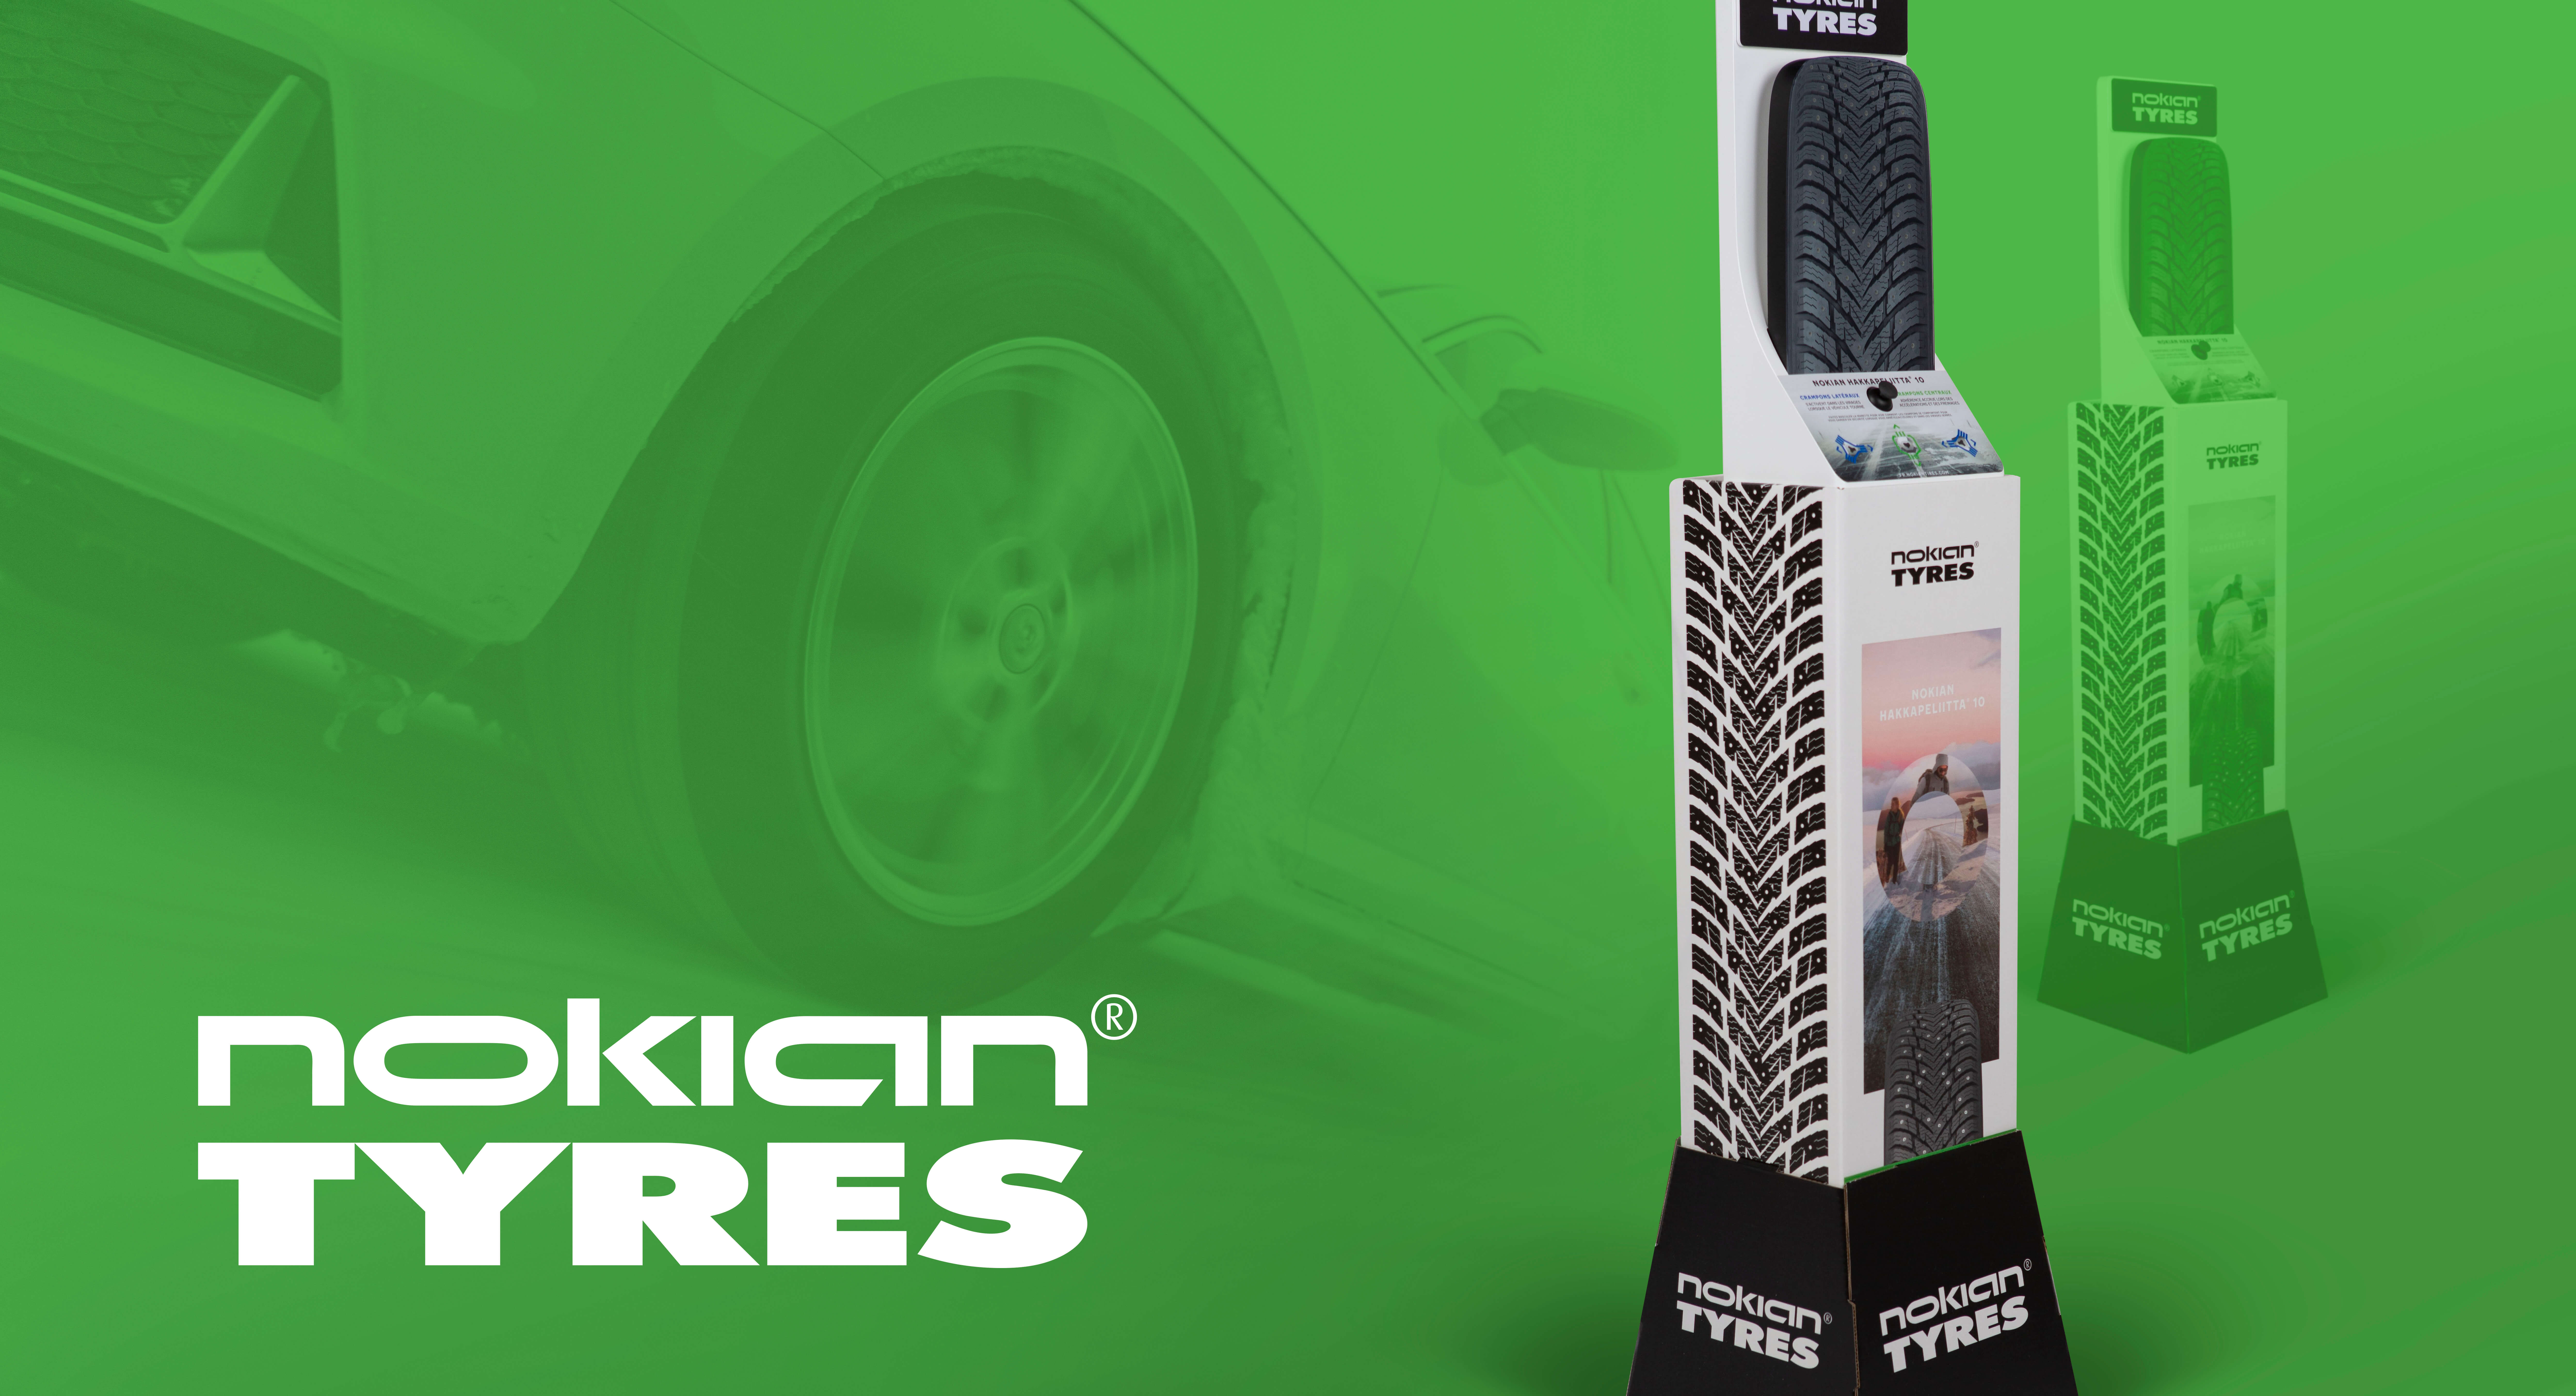 Nokian Tyres displays with a close up of the tire in the background